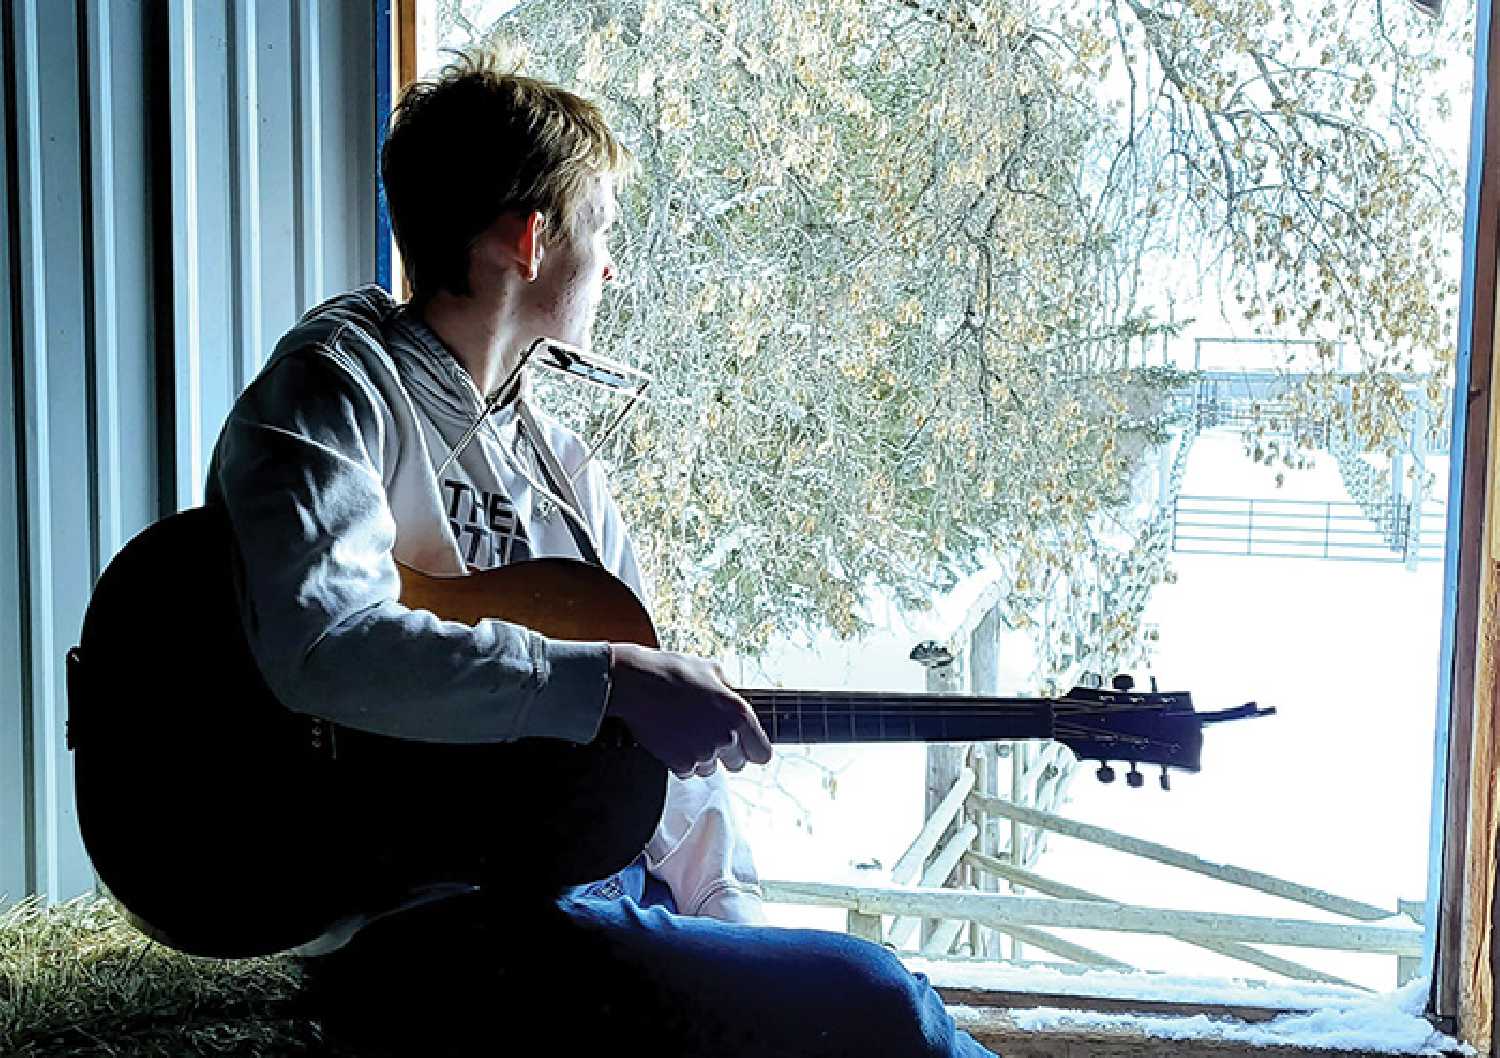 17-year-old Lachlan Neville will be opening for JJ Voss on February 4.